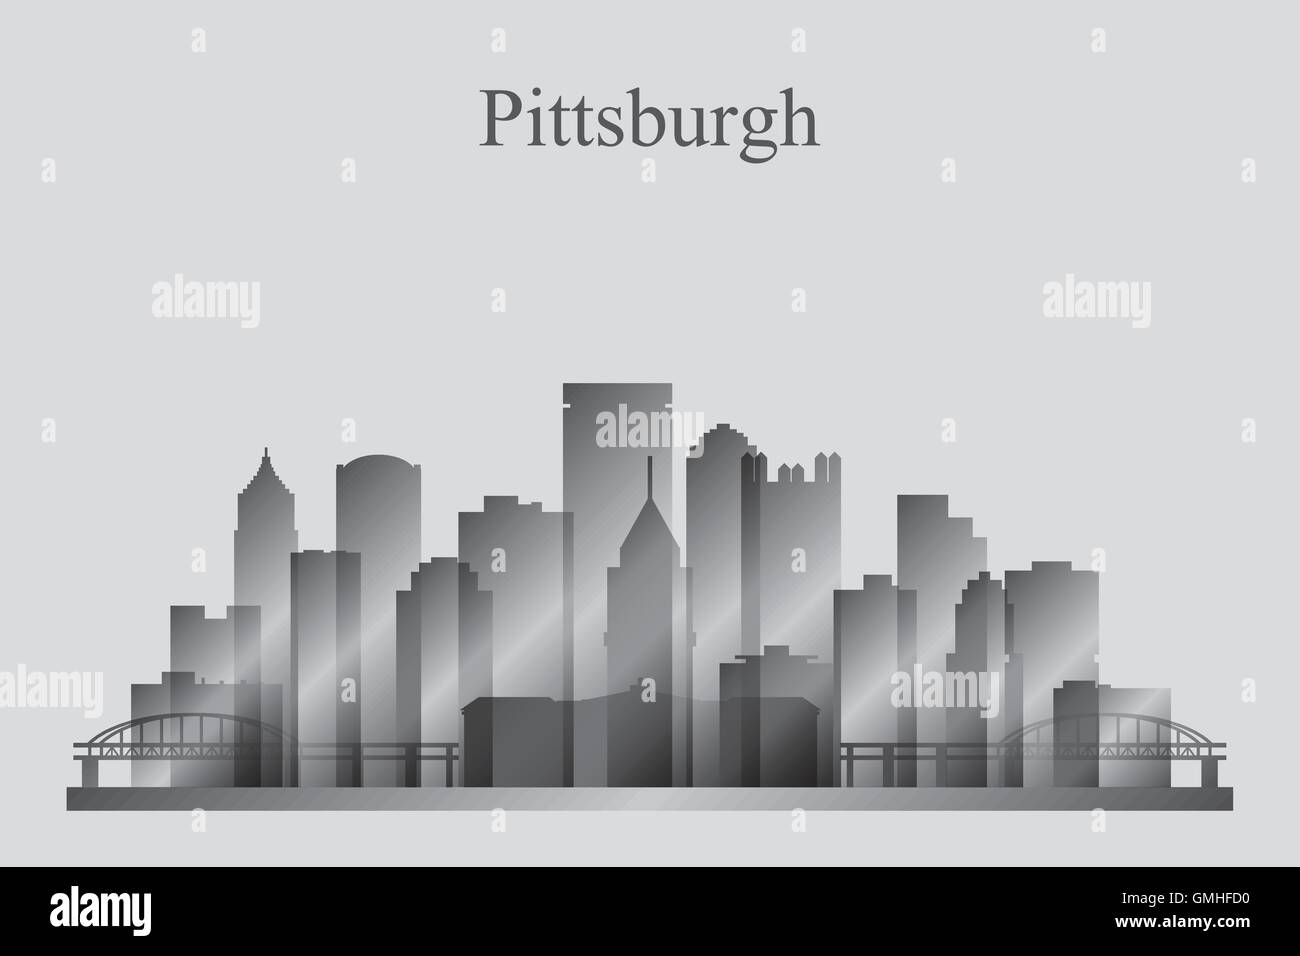 Pittsburgh city skyline silhouette in grayscale Stock Vector